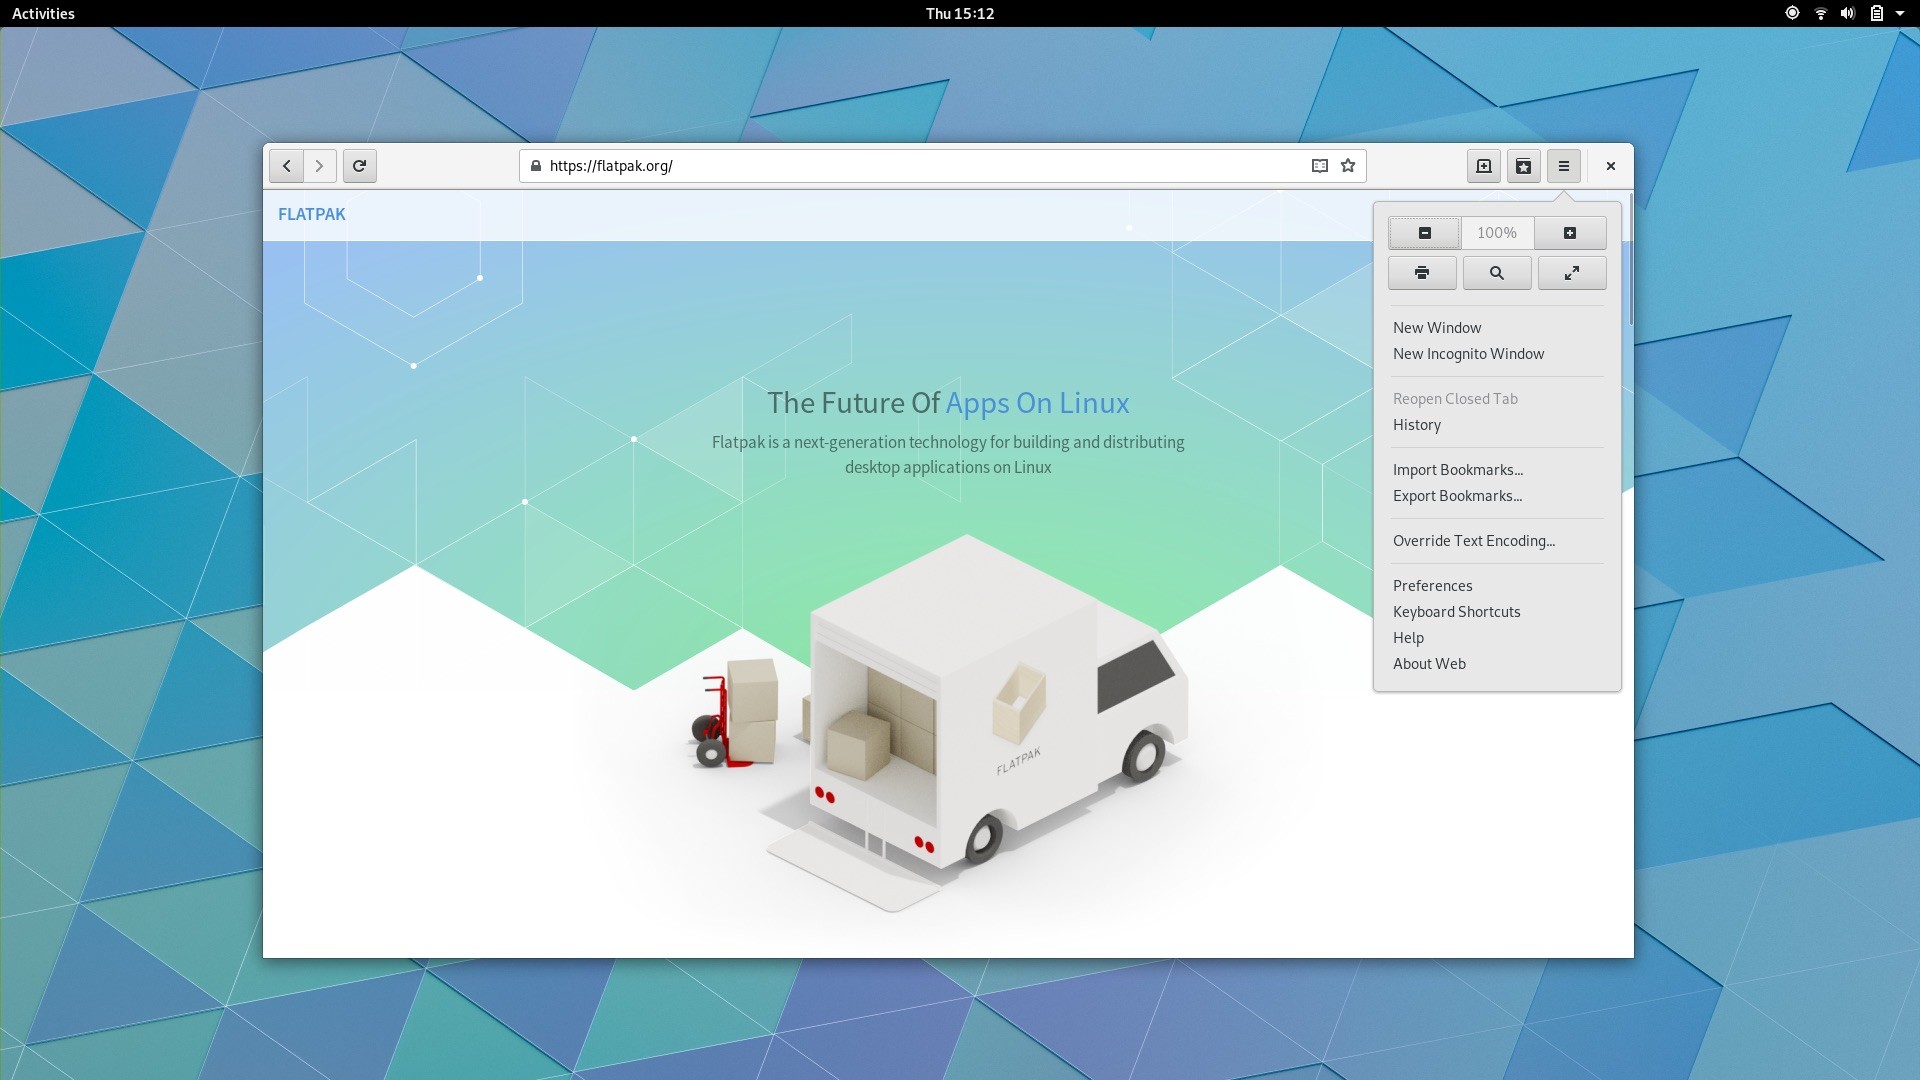 GNOME Plans  to Retire Application Menus from the GNOME 3 